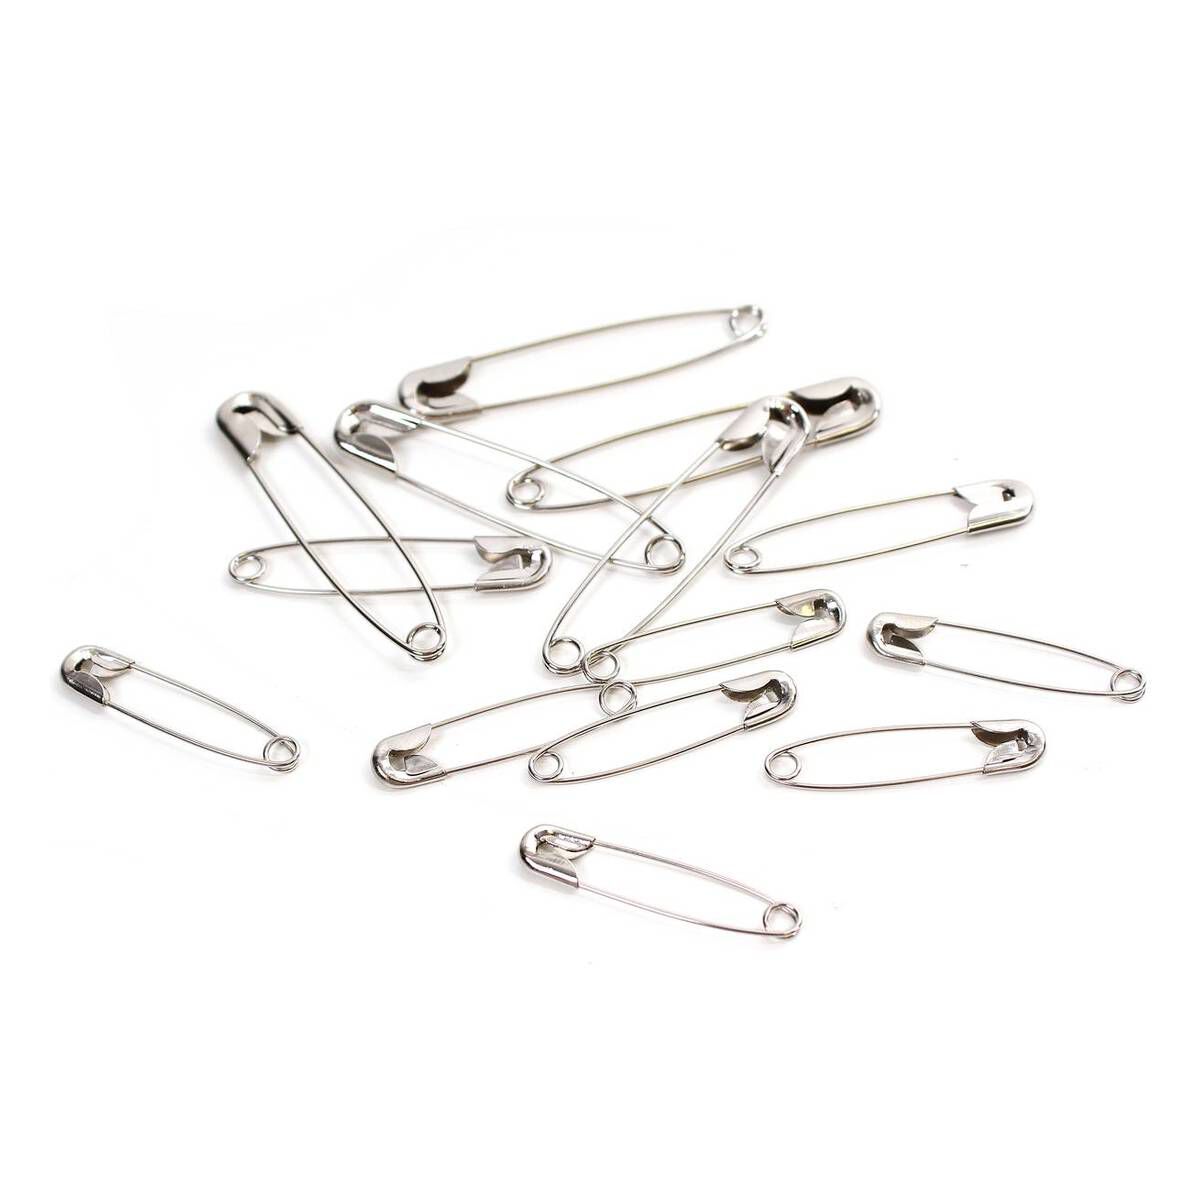 50 x Assorted SAFETY PINS Silver Colour Hobby Craft Sewing Needle Pin Art GEM UK 